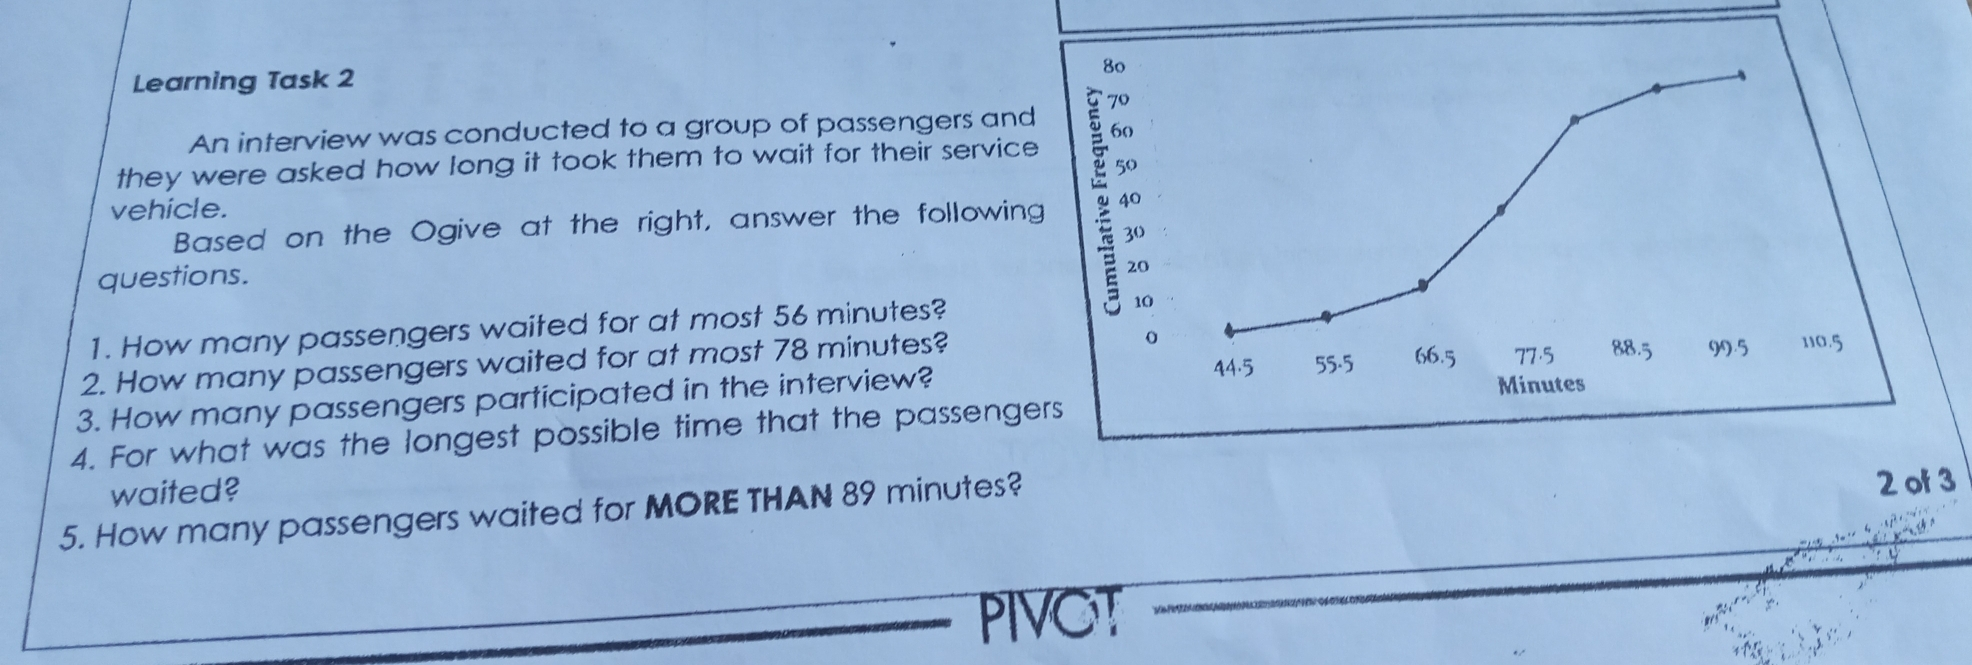 Learning Task 2 An interview was conducted to a group of passengers and they were asked how long it took them to wait for their service vehicle. Based on the Ogive at the right, answer the following questions. 1. How many passengers waited for at most 56 minutes? 2. How many passengers waited for at most 78 minutes? 3. How many passengers participated in the interview? 4. For what was the longest possible time that the passengers waited? 5. How many passengers waited for MORE THAN 89 minutes? 2 of 3 PIVCT